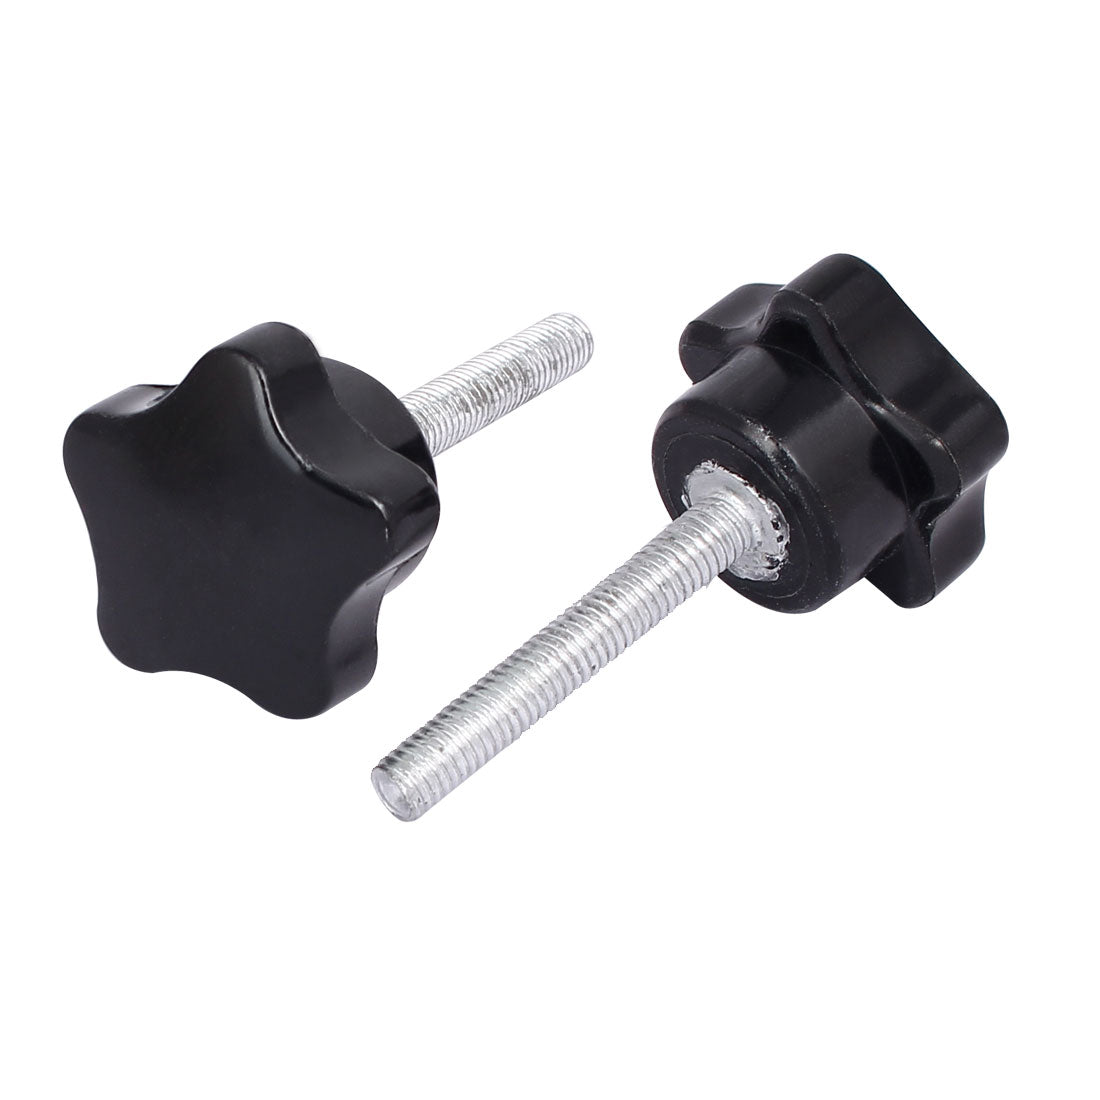 uxcell Uxcell M6 x 40mm Plastic Star Head Screw Bolts Clamping Knobs Grips Black 2pcs